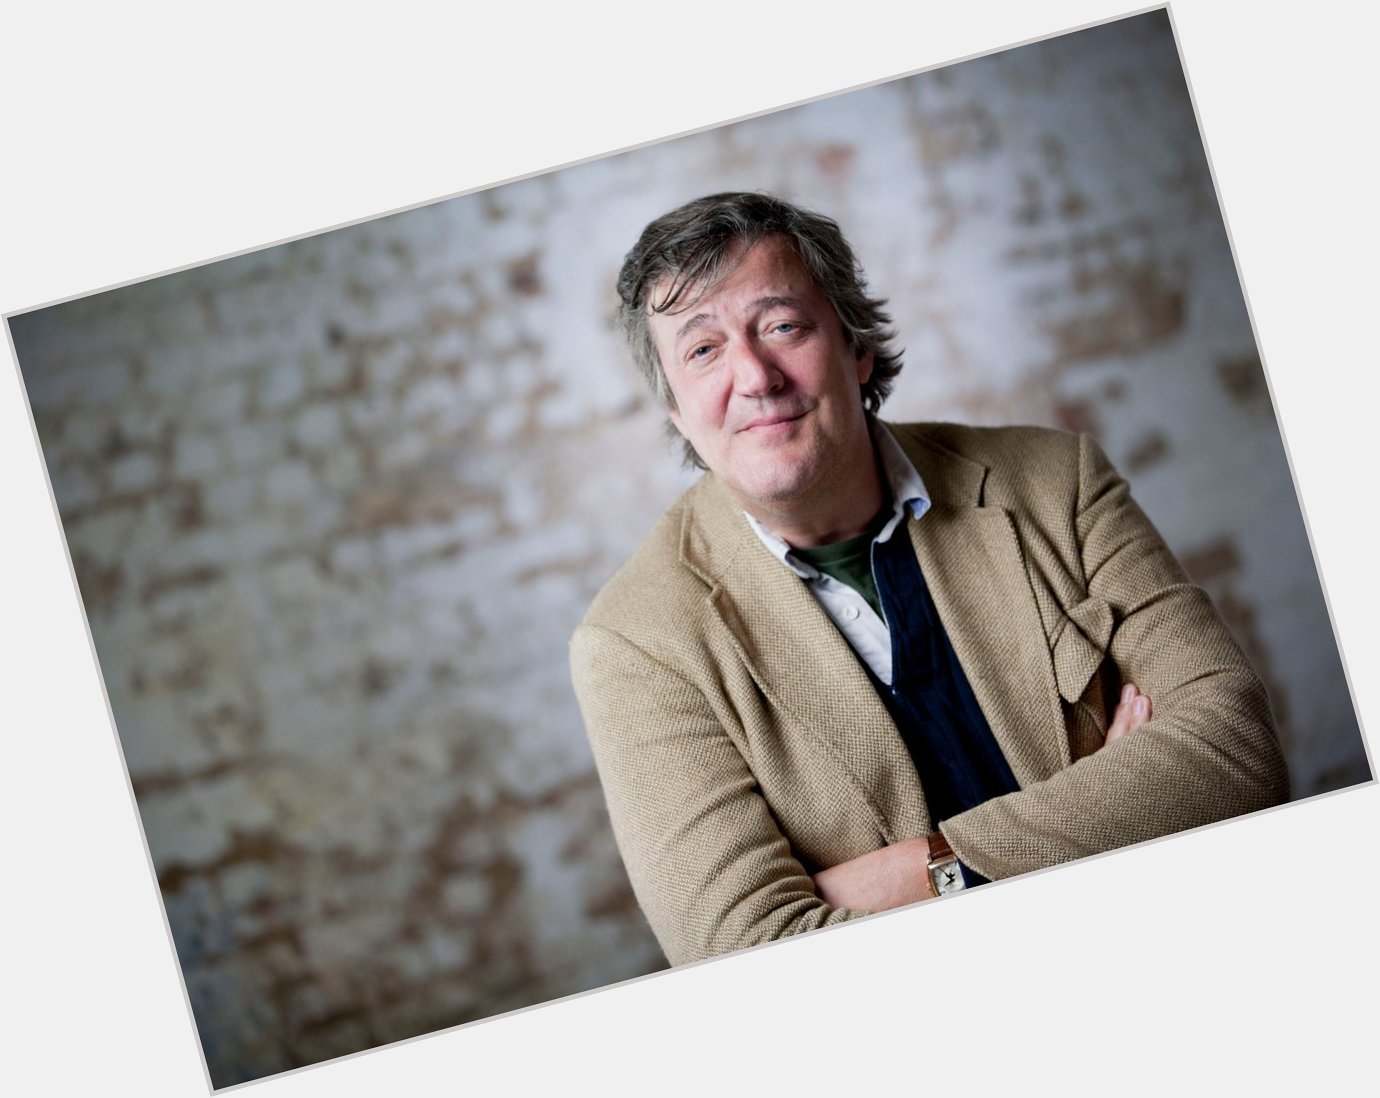  Happy Birthday to comedian, actor, writer, presenter, and activist Stephen Fry! 